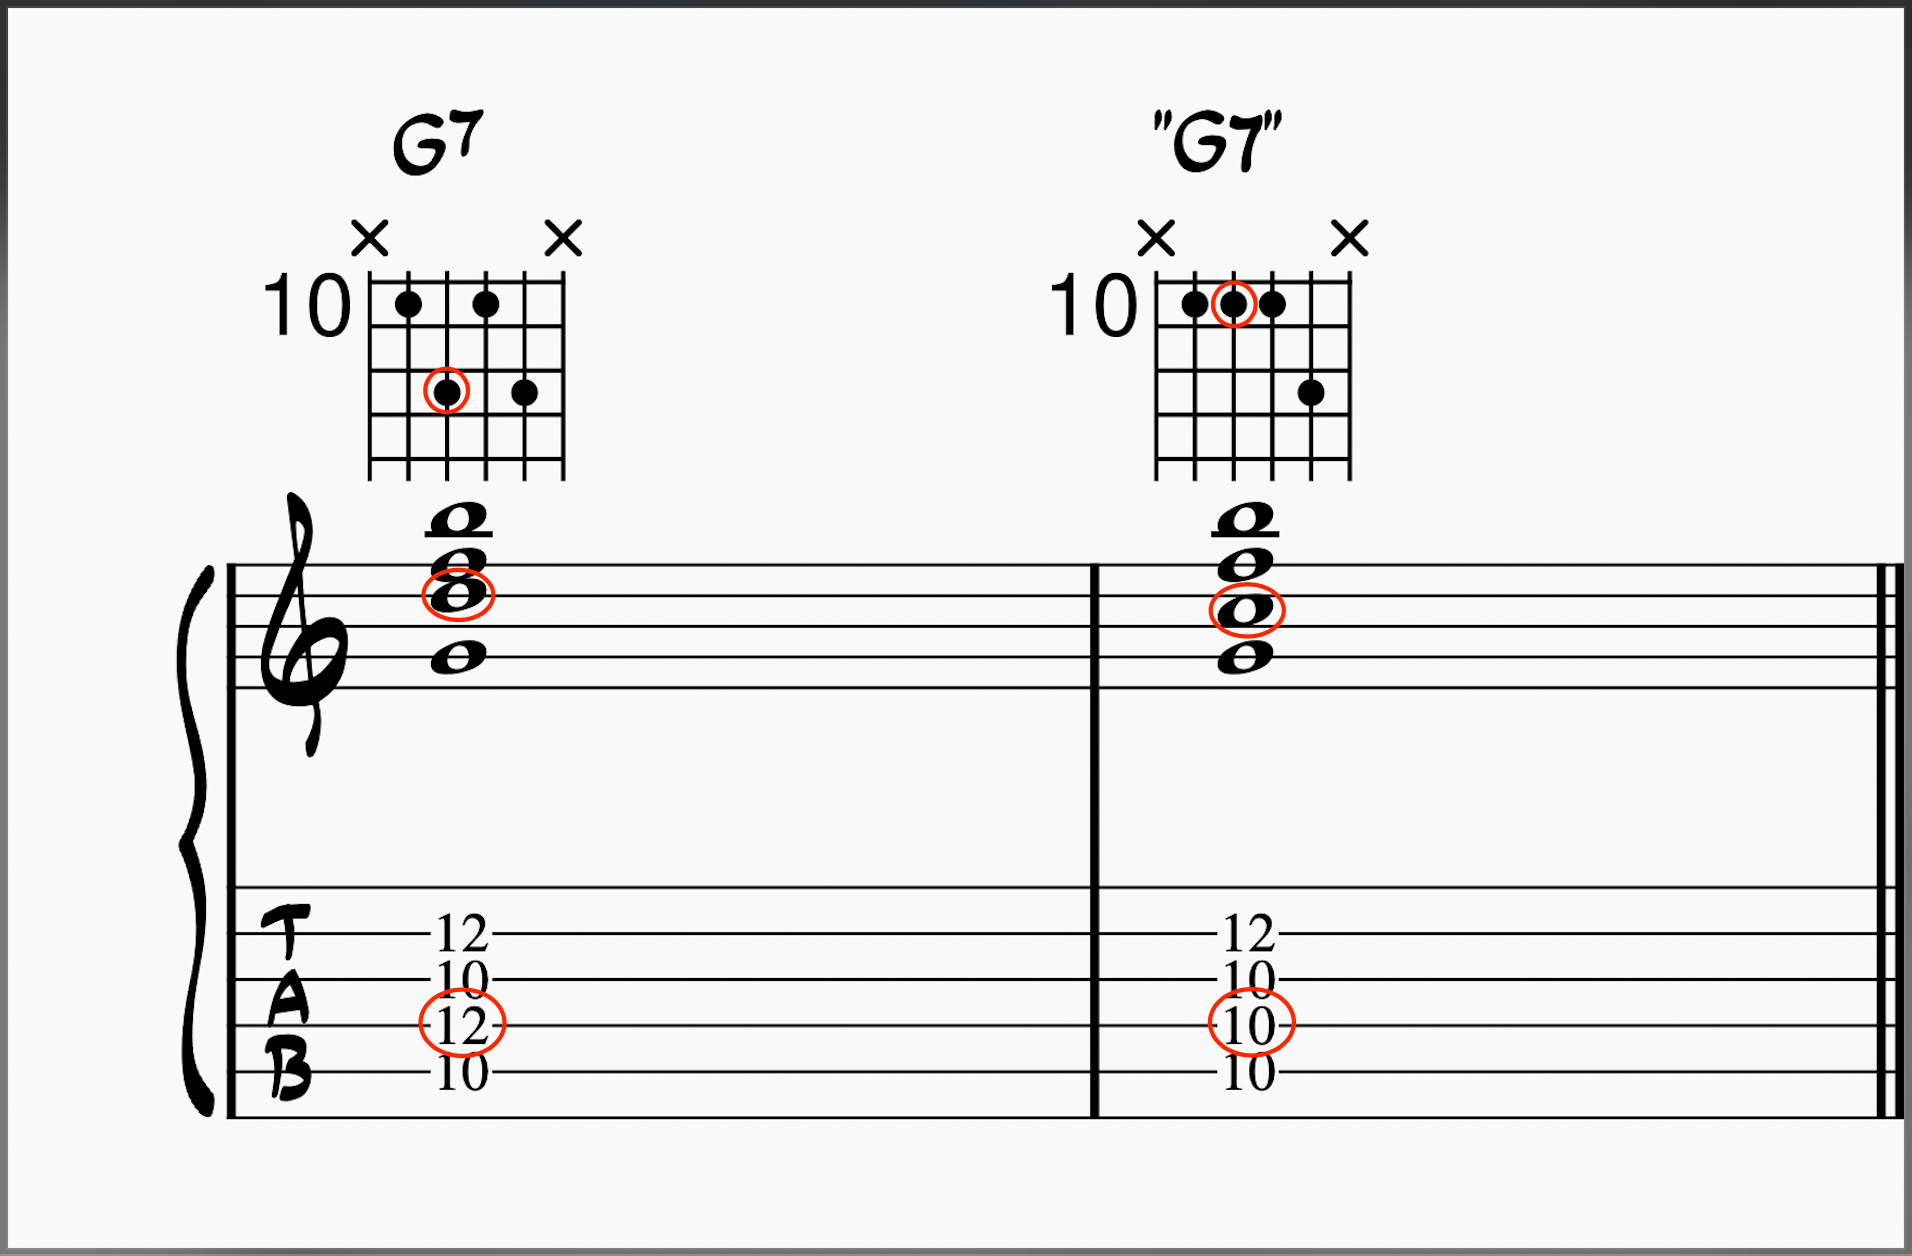 Comparing a G7 voicing on guitar to its quartal voicing equivalent 